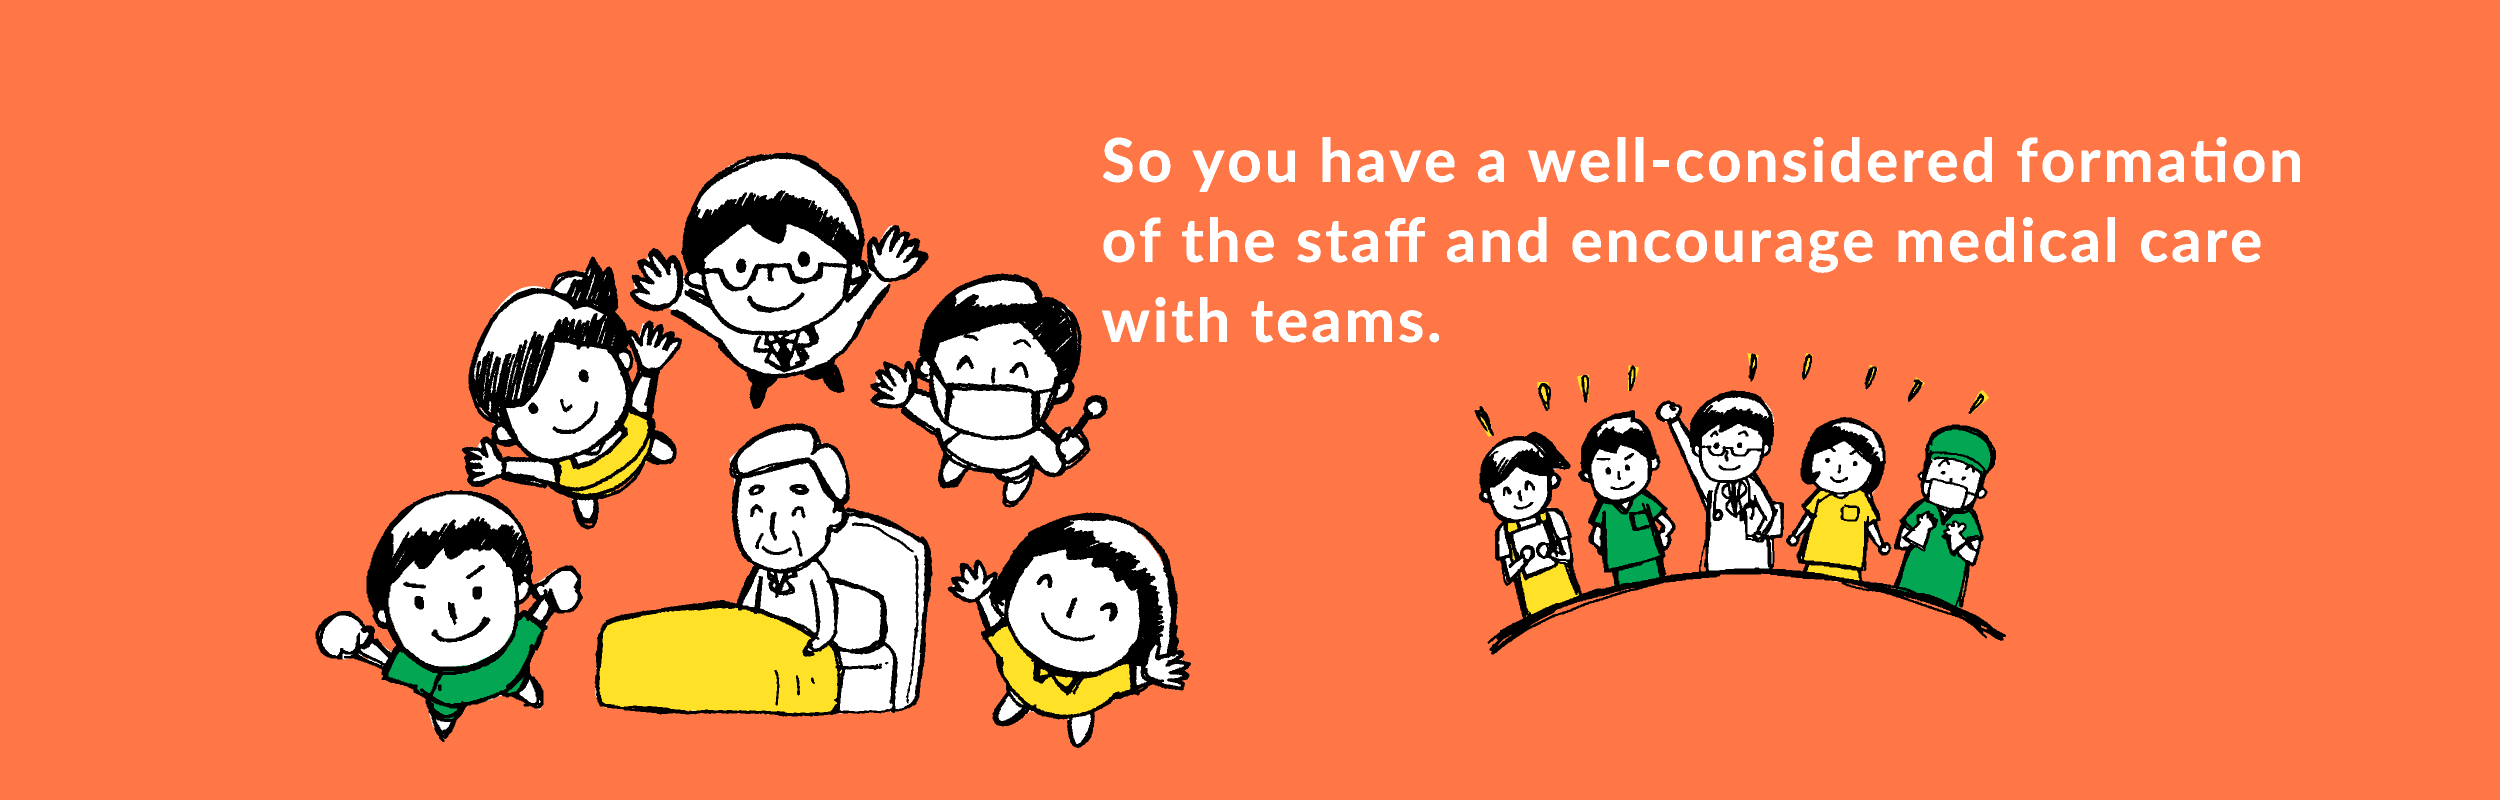 So you have a well-considered formation of the staff and encourage medical care with teams.